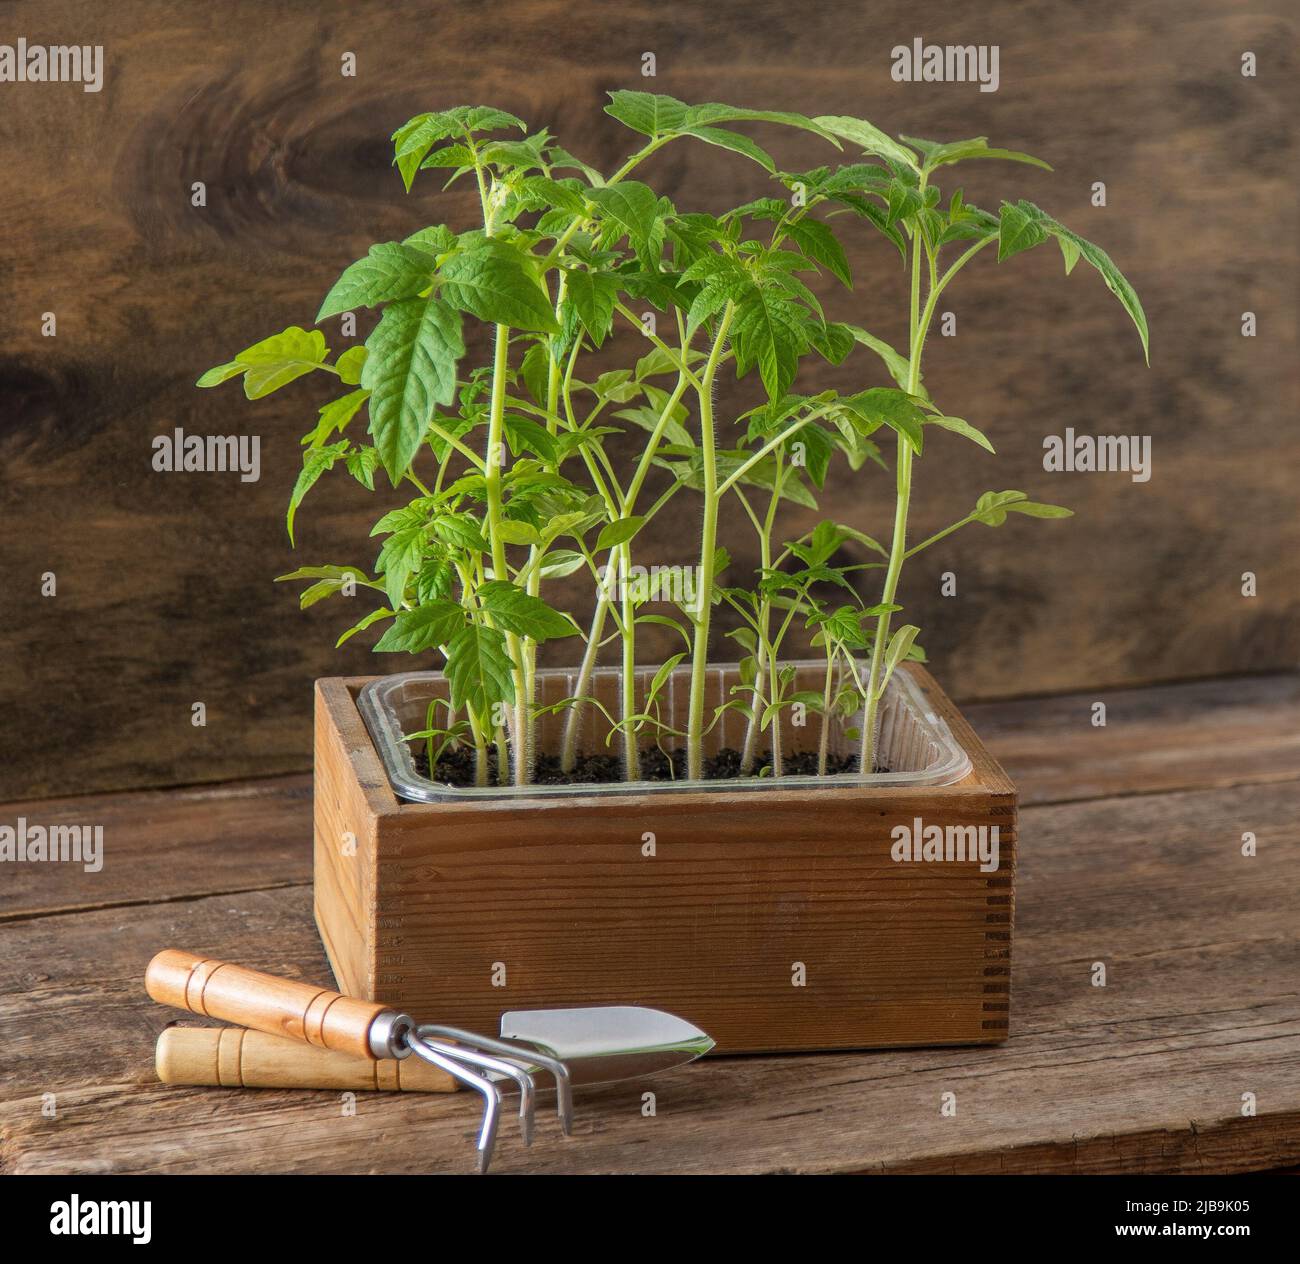 Seedling of tomatoes. Spring gardening. Bush of tomato. Grow vegetables at home. Propagation and planting a vegetable garden. Plant in a box. Wooden background. Stock Photo